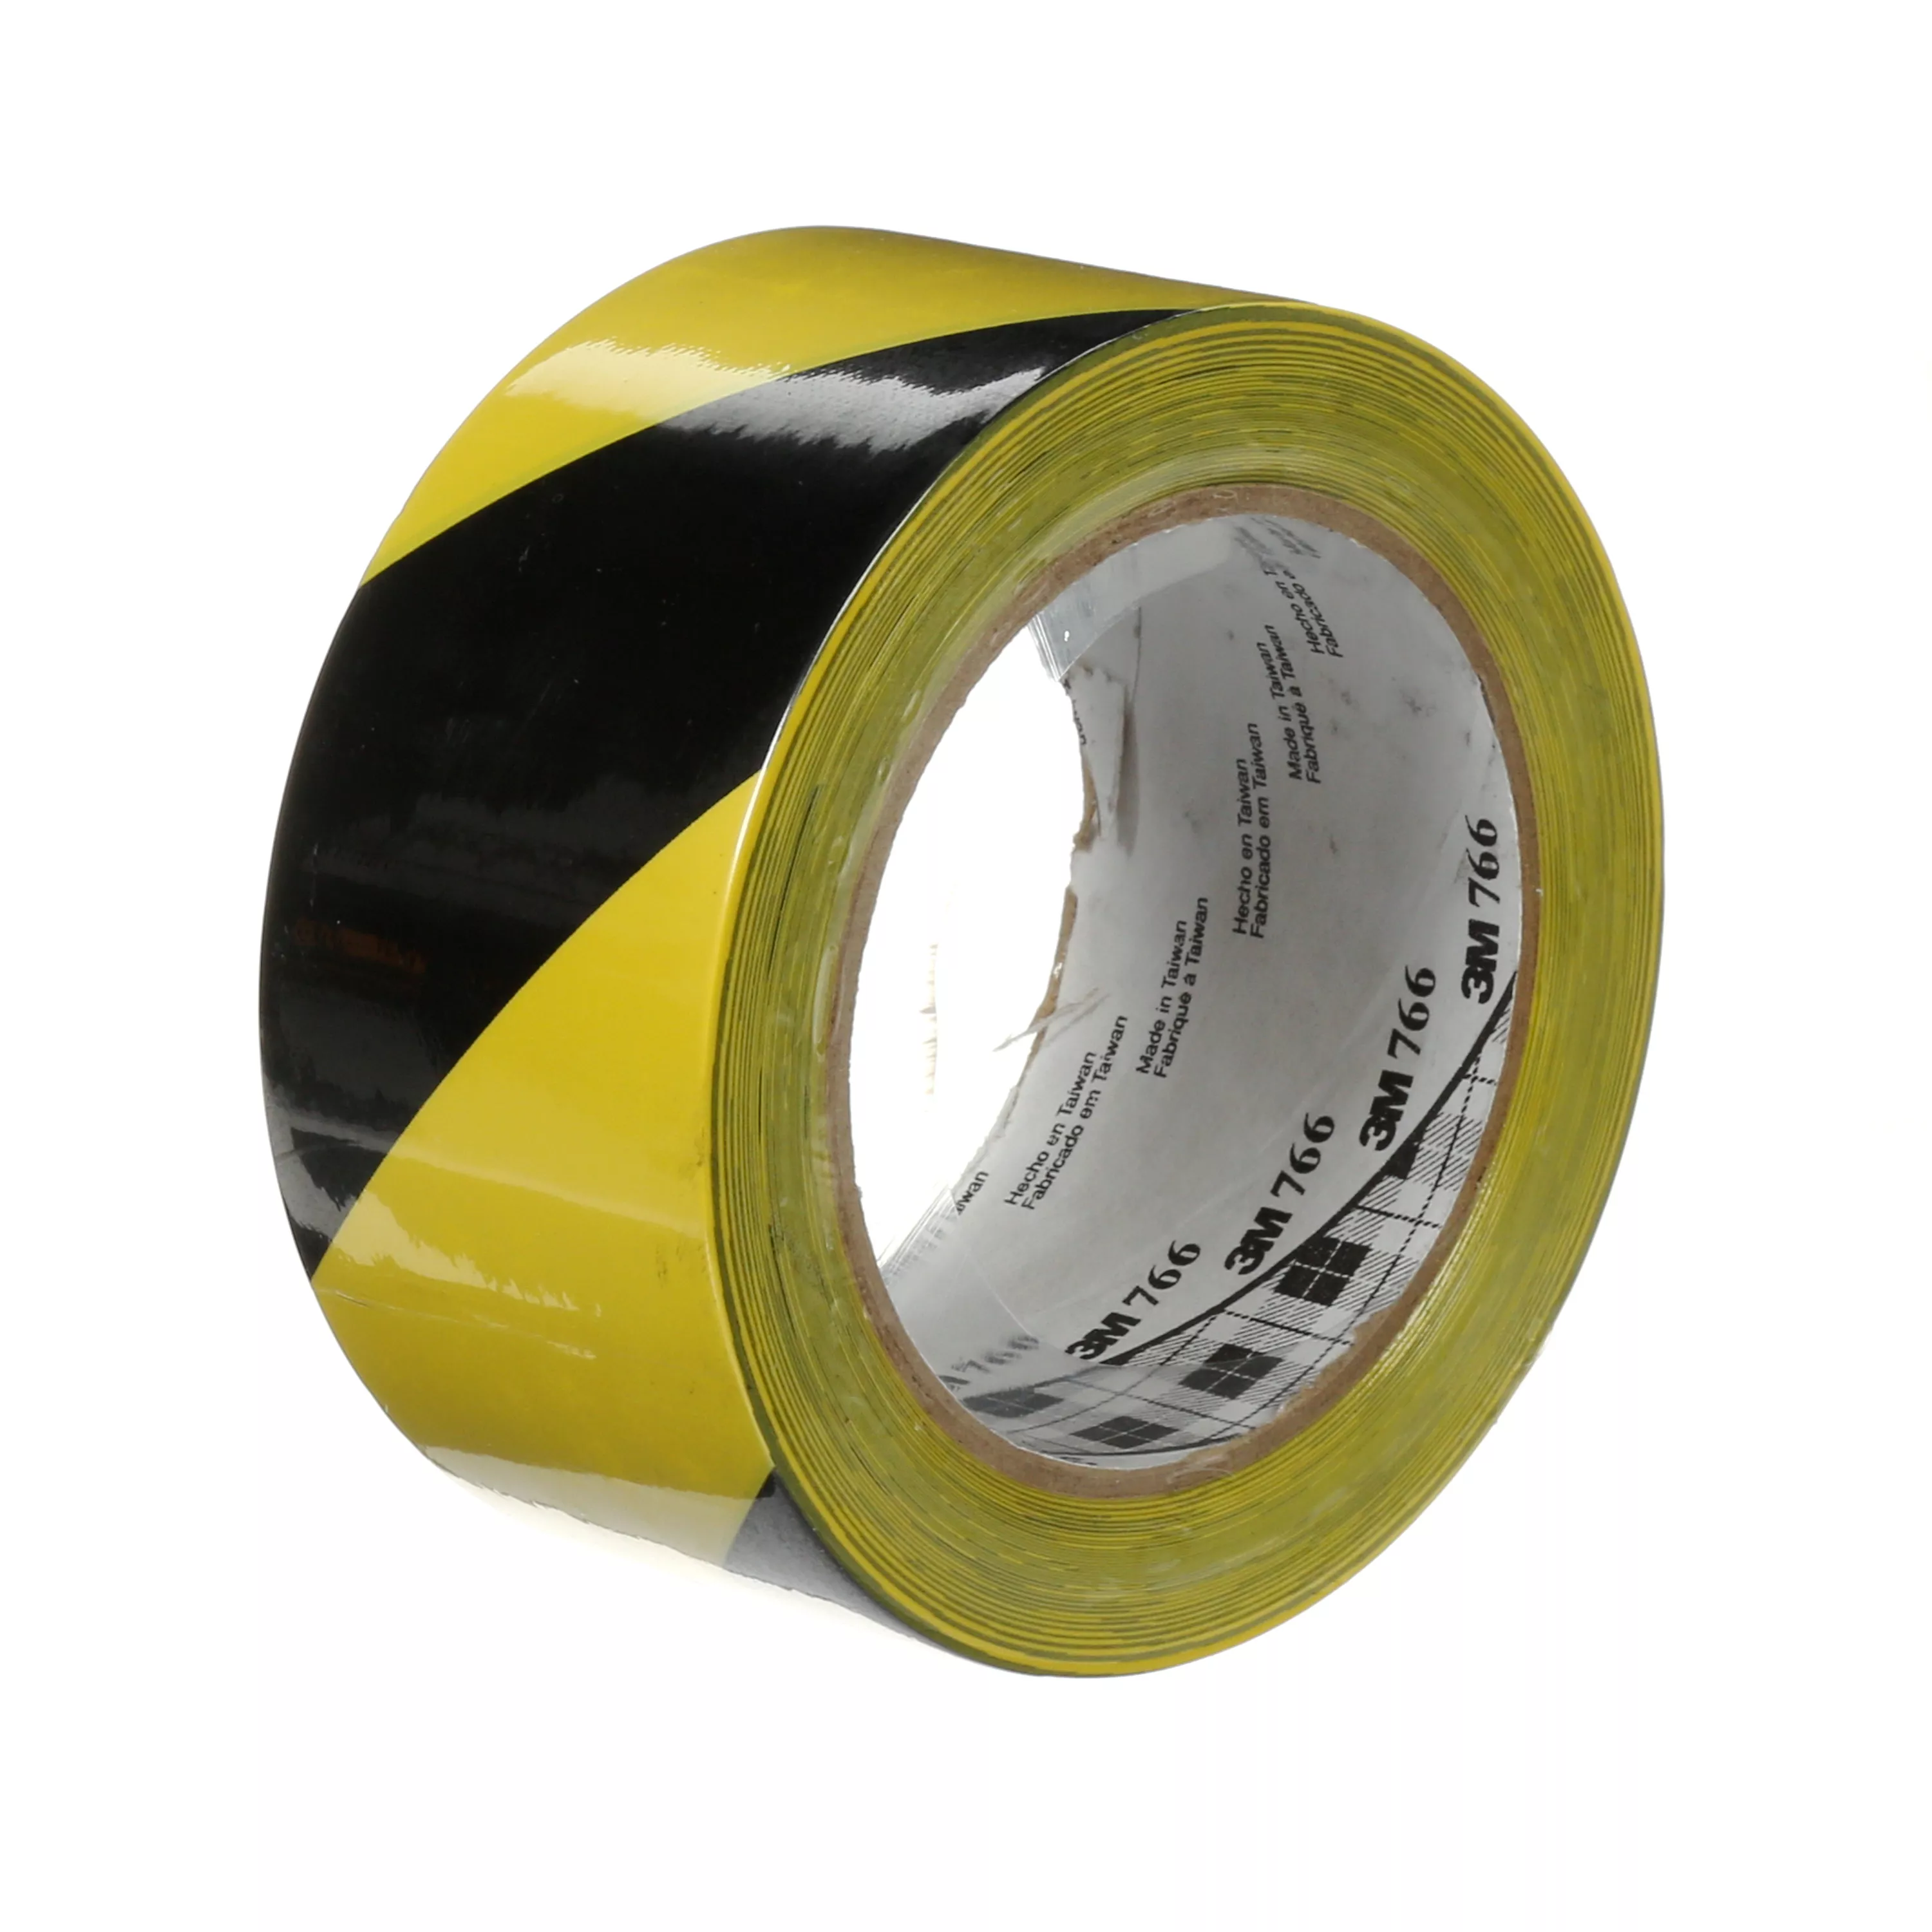 3M™ Safety Stripe Vinyl Tape 766DC, Black/Yellow, 2 in x 36 yd, 5 mil, 12 Roll/Case, Individually Wrapped Conveniently Packaged